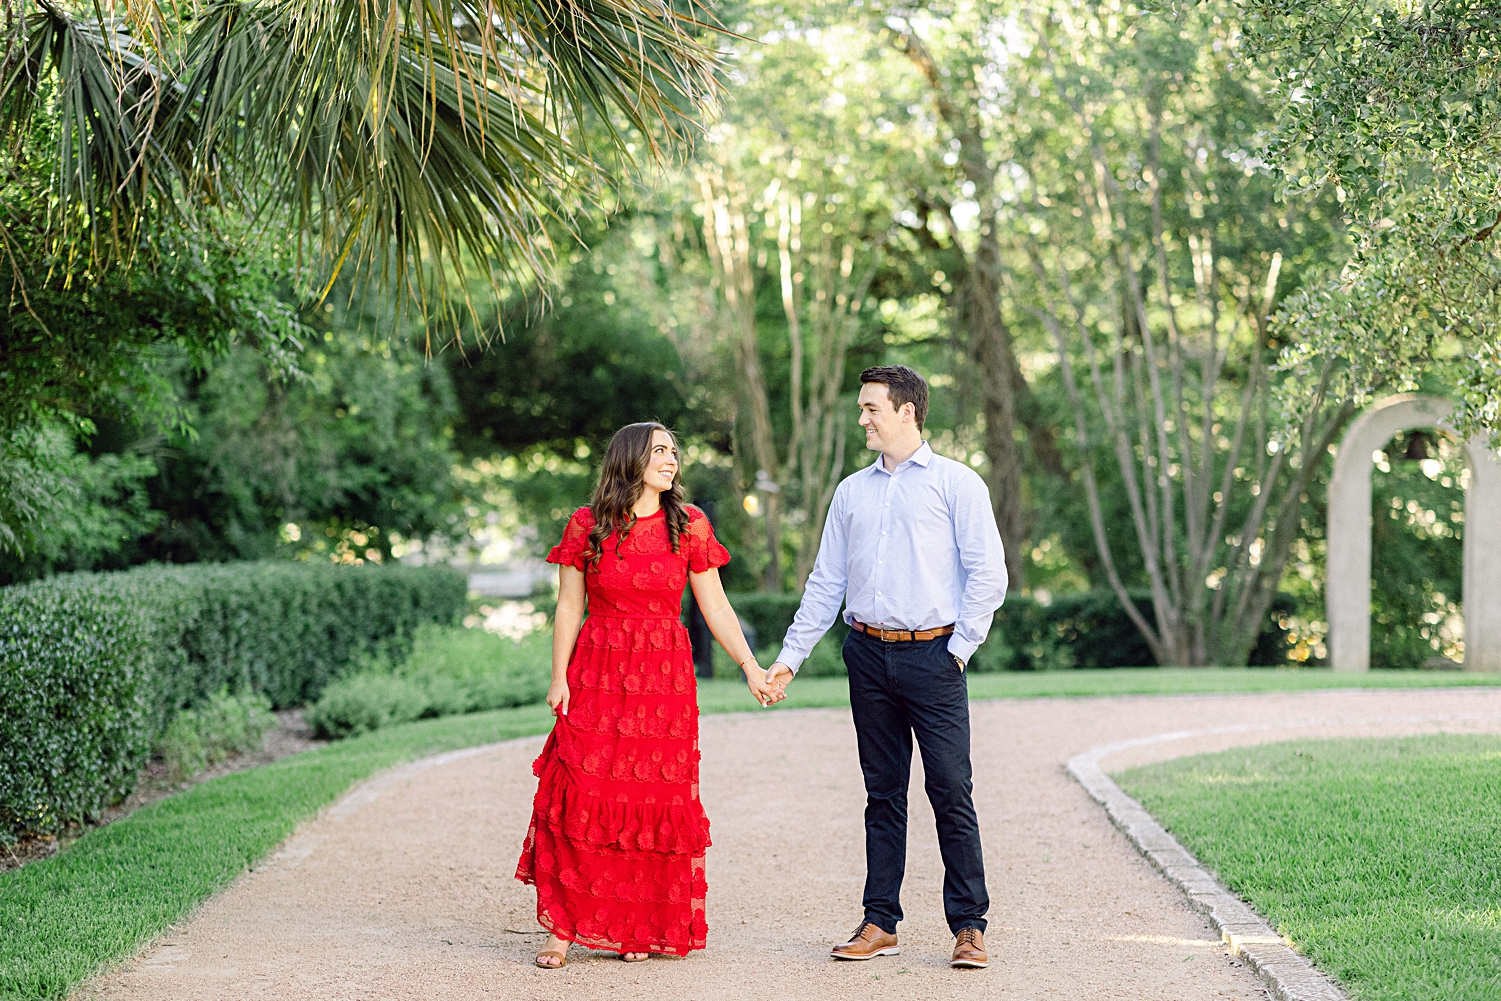 Man and woman in red dress standing holding hands on path in green garden